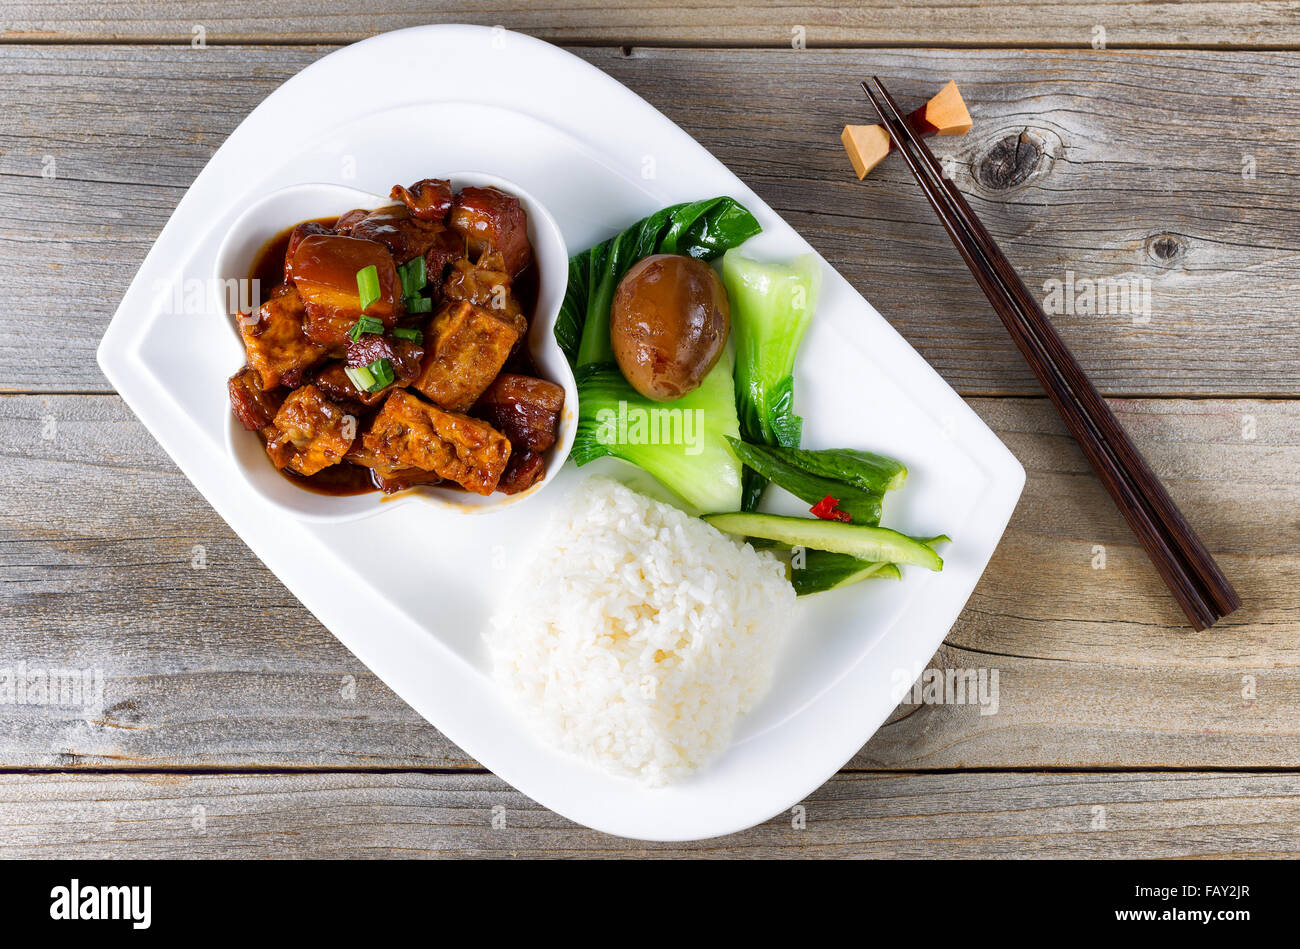 Top view of succulent Chinese dish with fried tofu, bok choy, soy sauce egg, cucumber, rice and chopsticks in holder Stock Photo